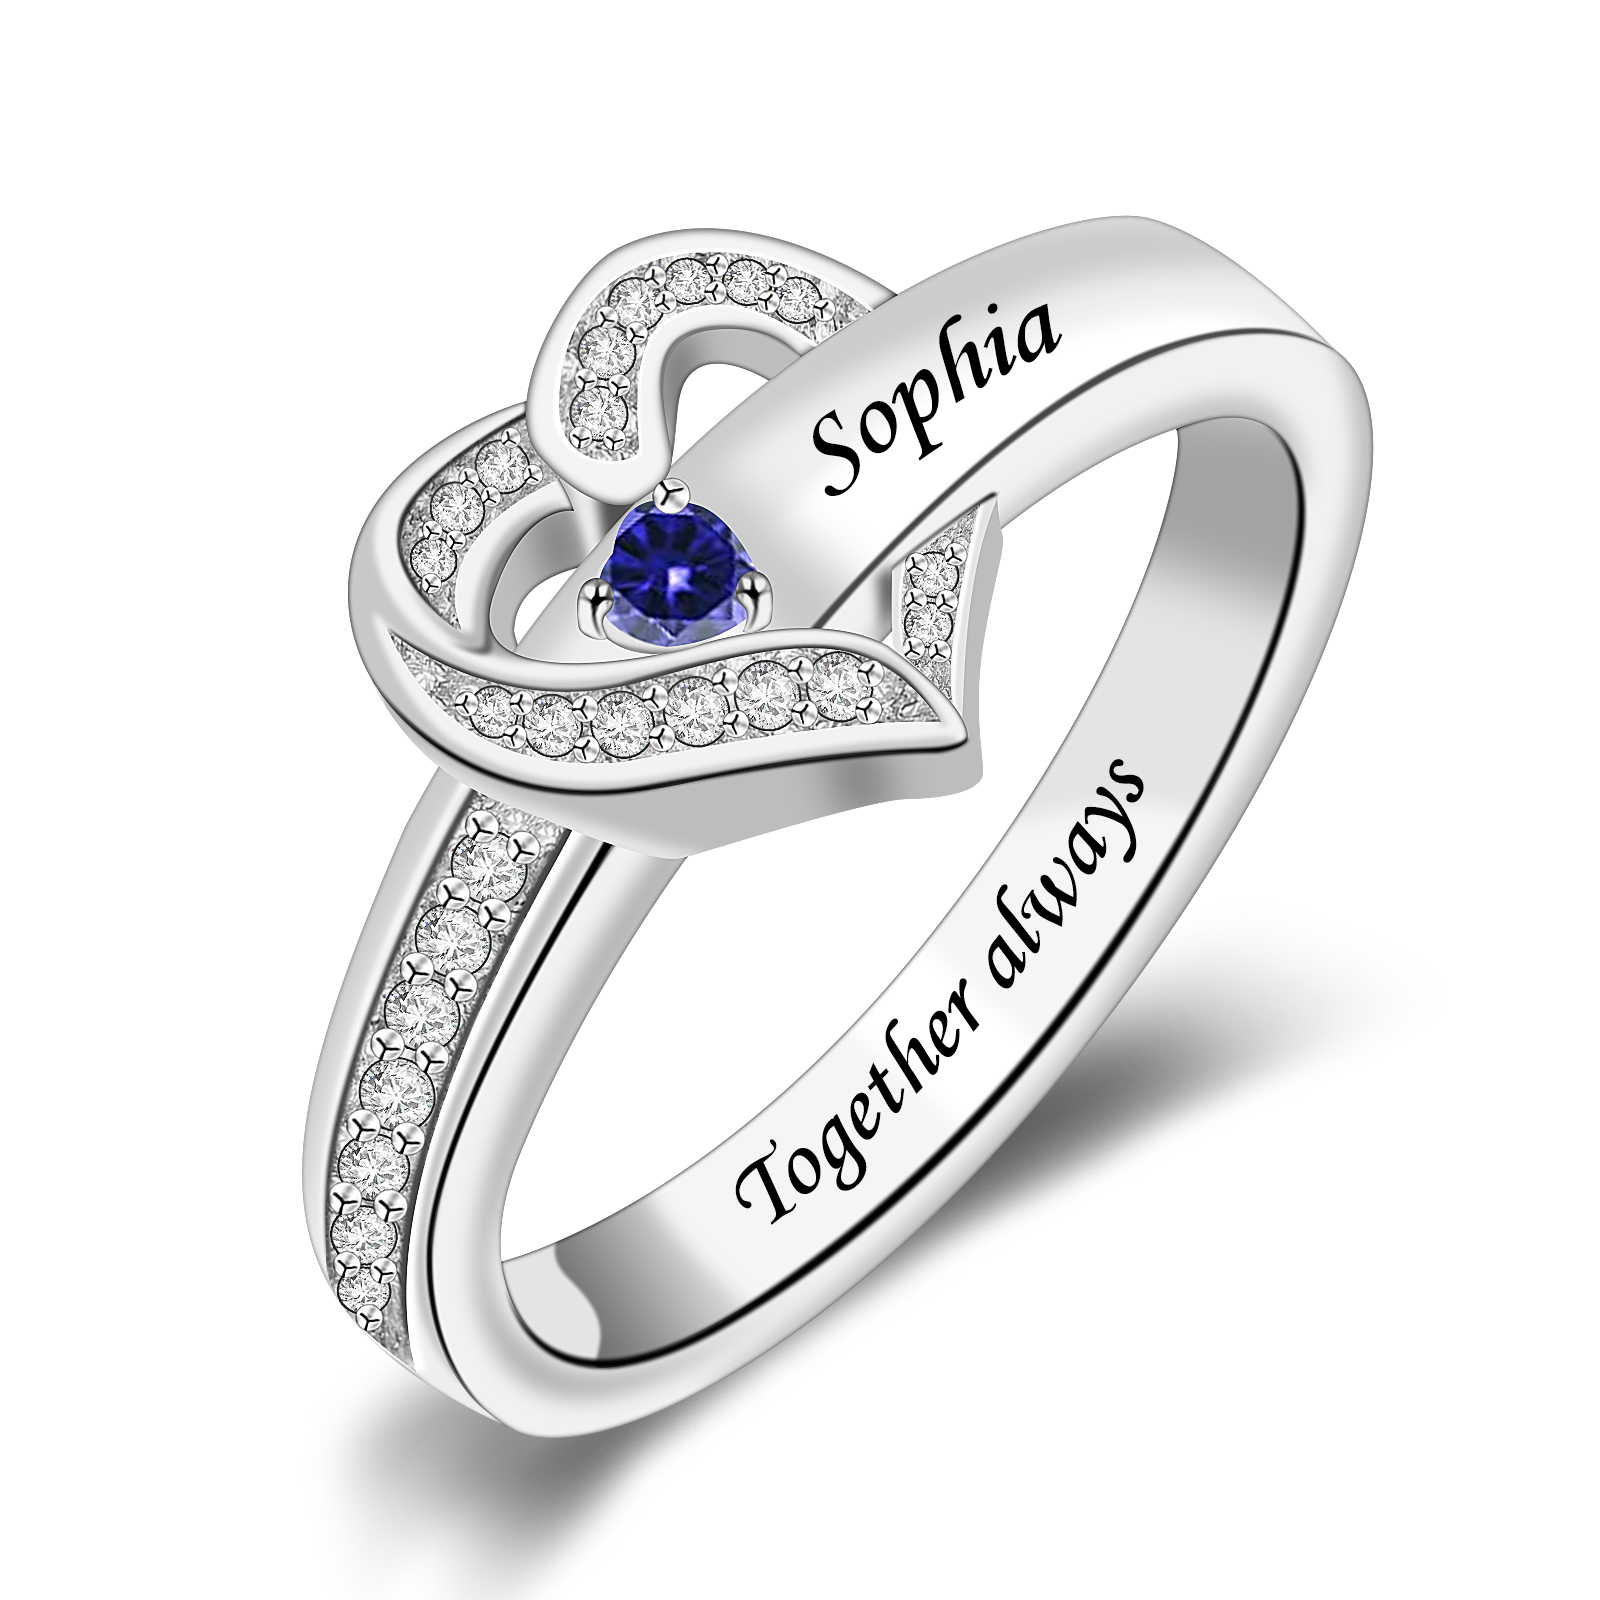 R6-1-1 Heart Mother Ring with Engraved Names and Simulated Birthstone